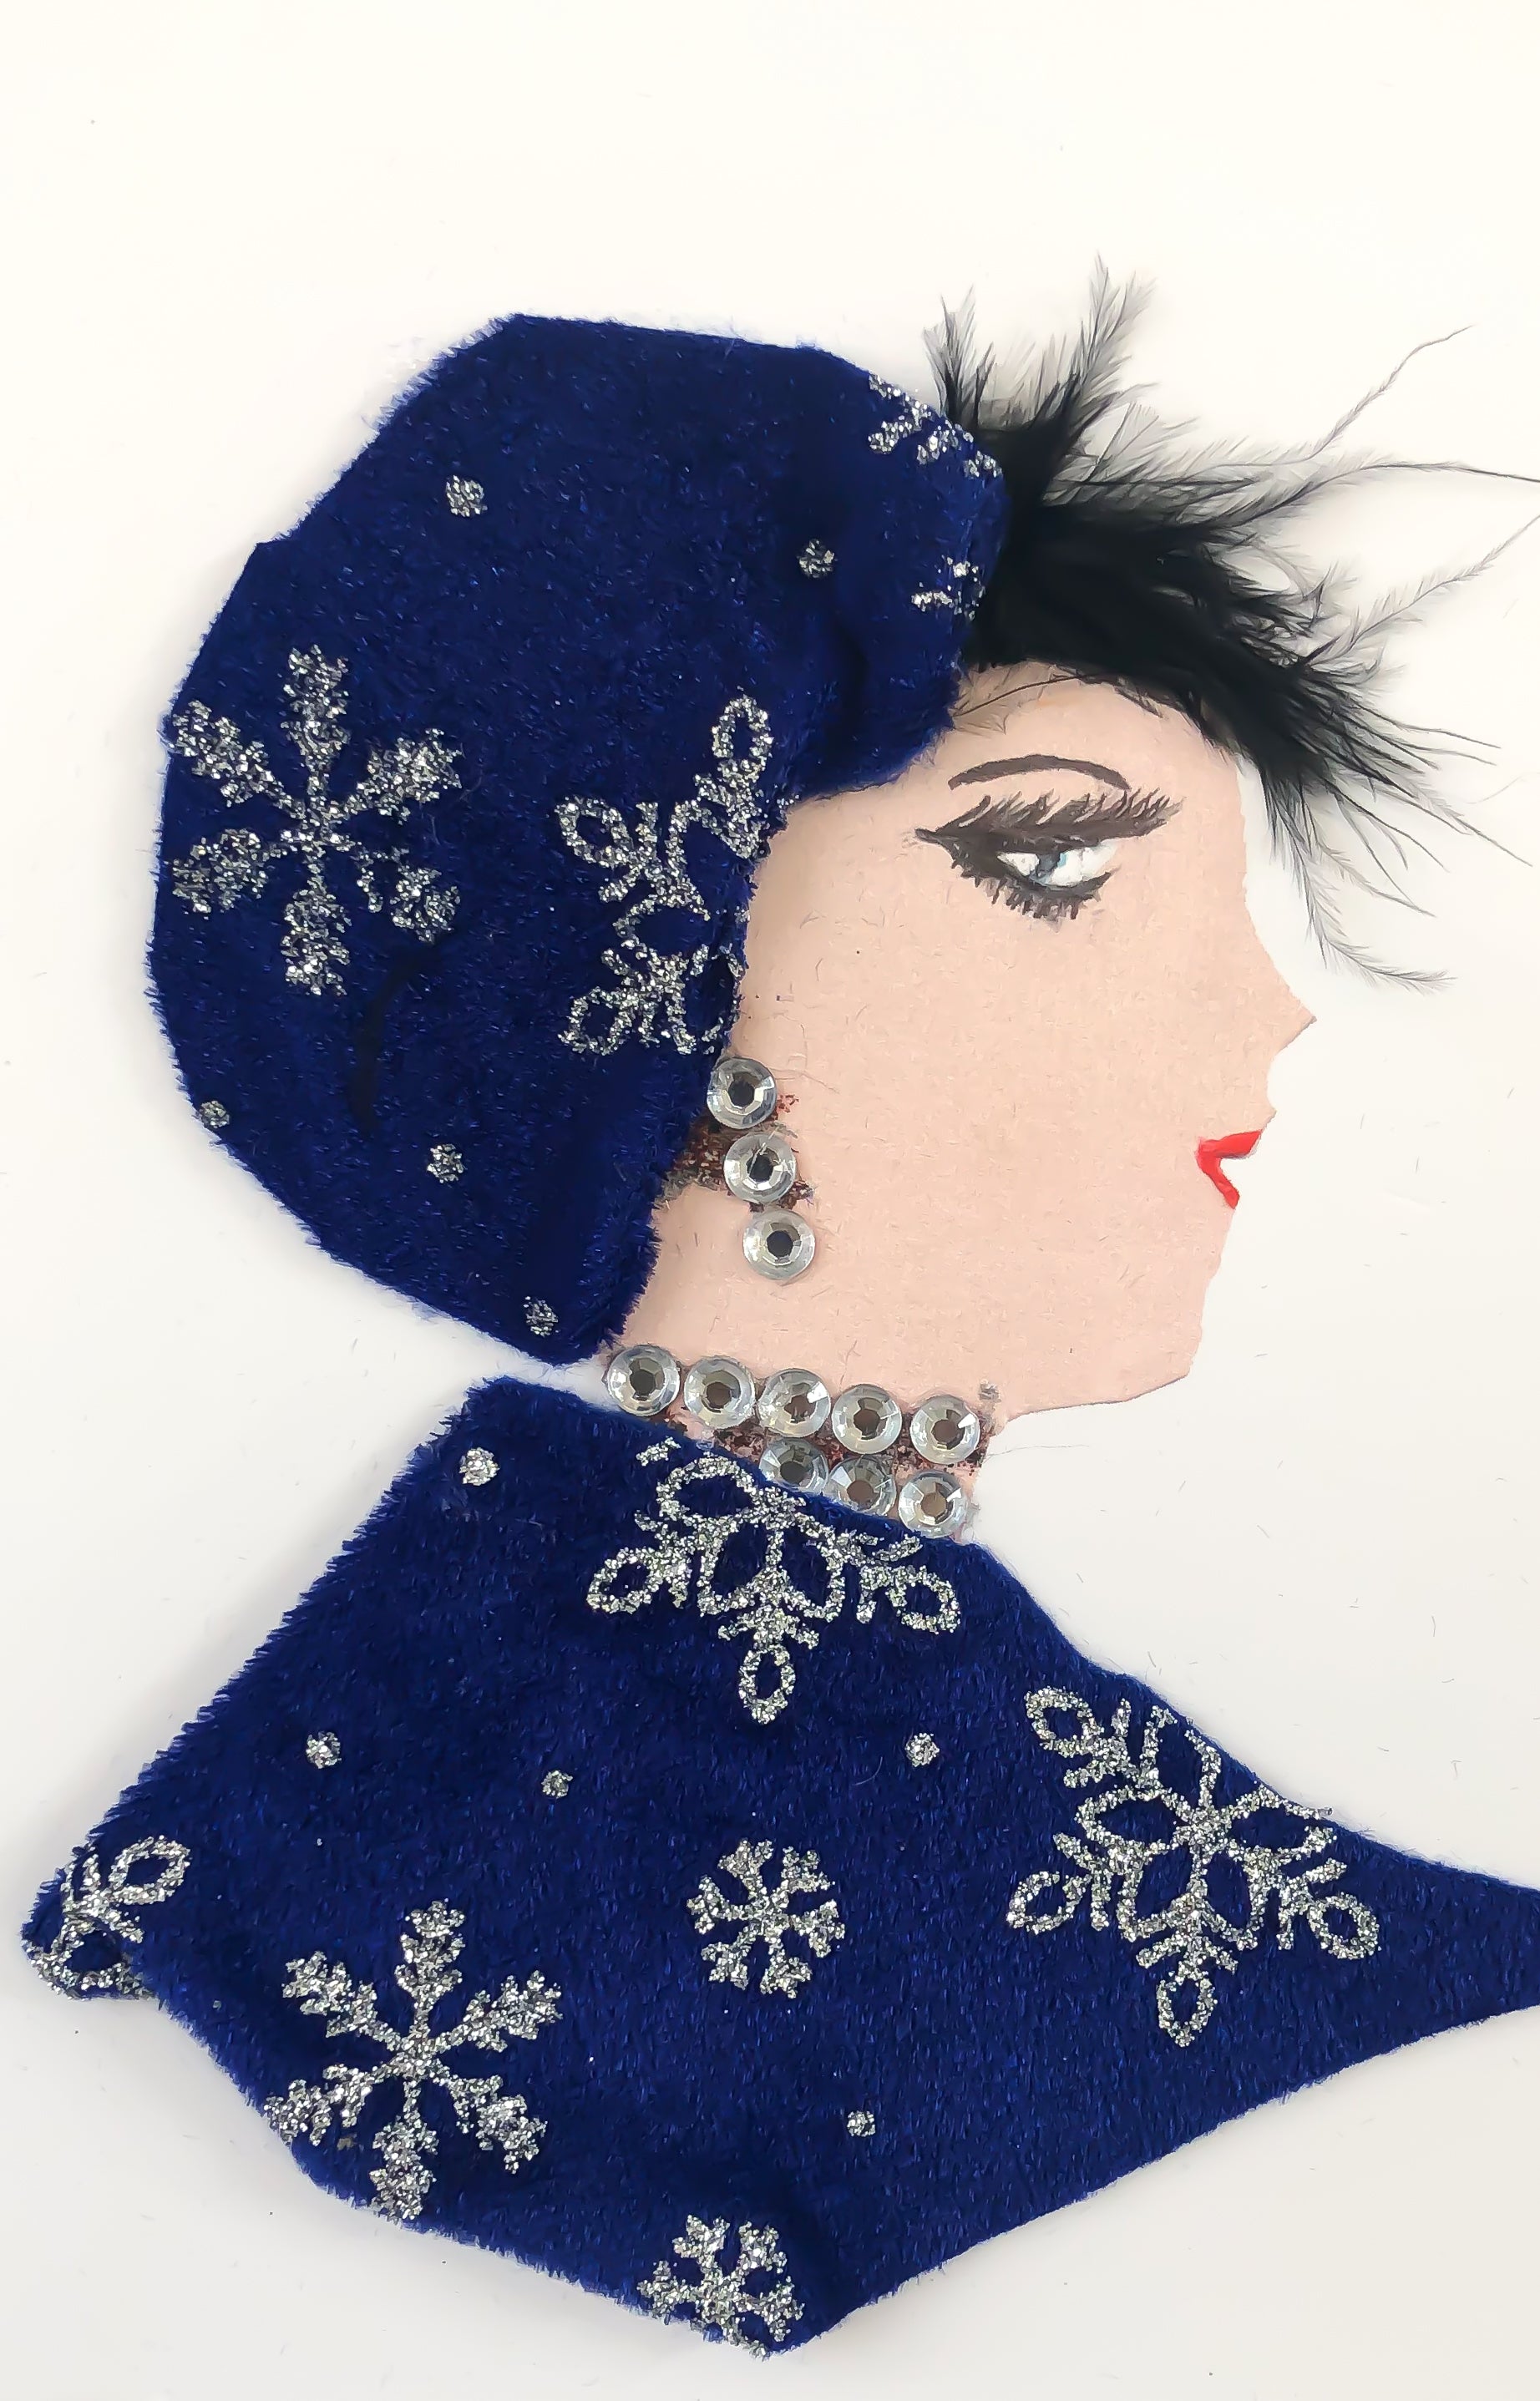 This card is of a woman named Betty Kingsbury. She wears a matching dress and headdress which is a blue felt material. There is a silver glitter snowflake pattern on both pieces. She wears a diamond gem necklace and matching earrings. Her black, feathery hair peaks out of the top of her headdress